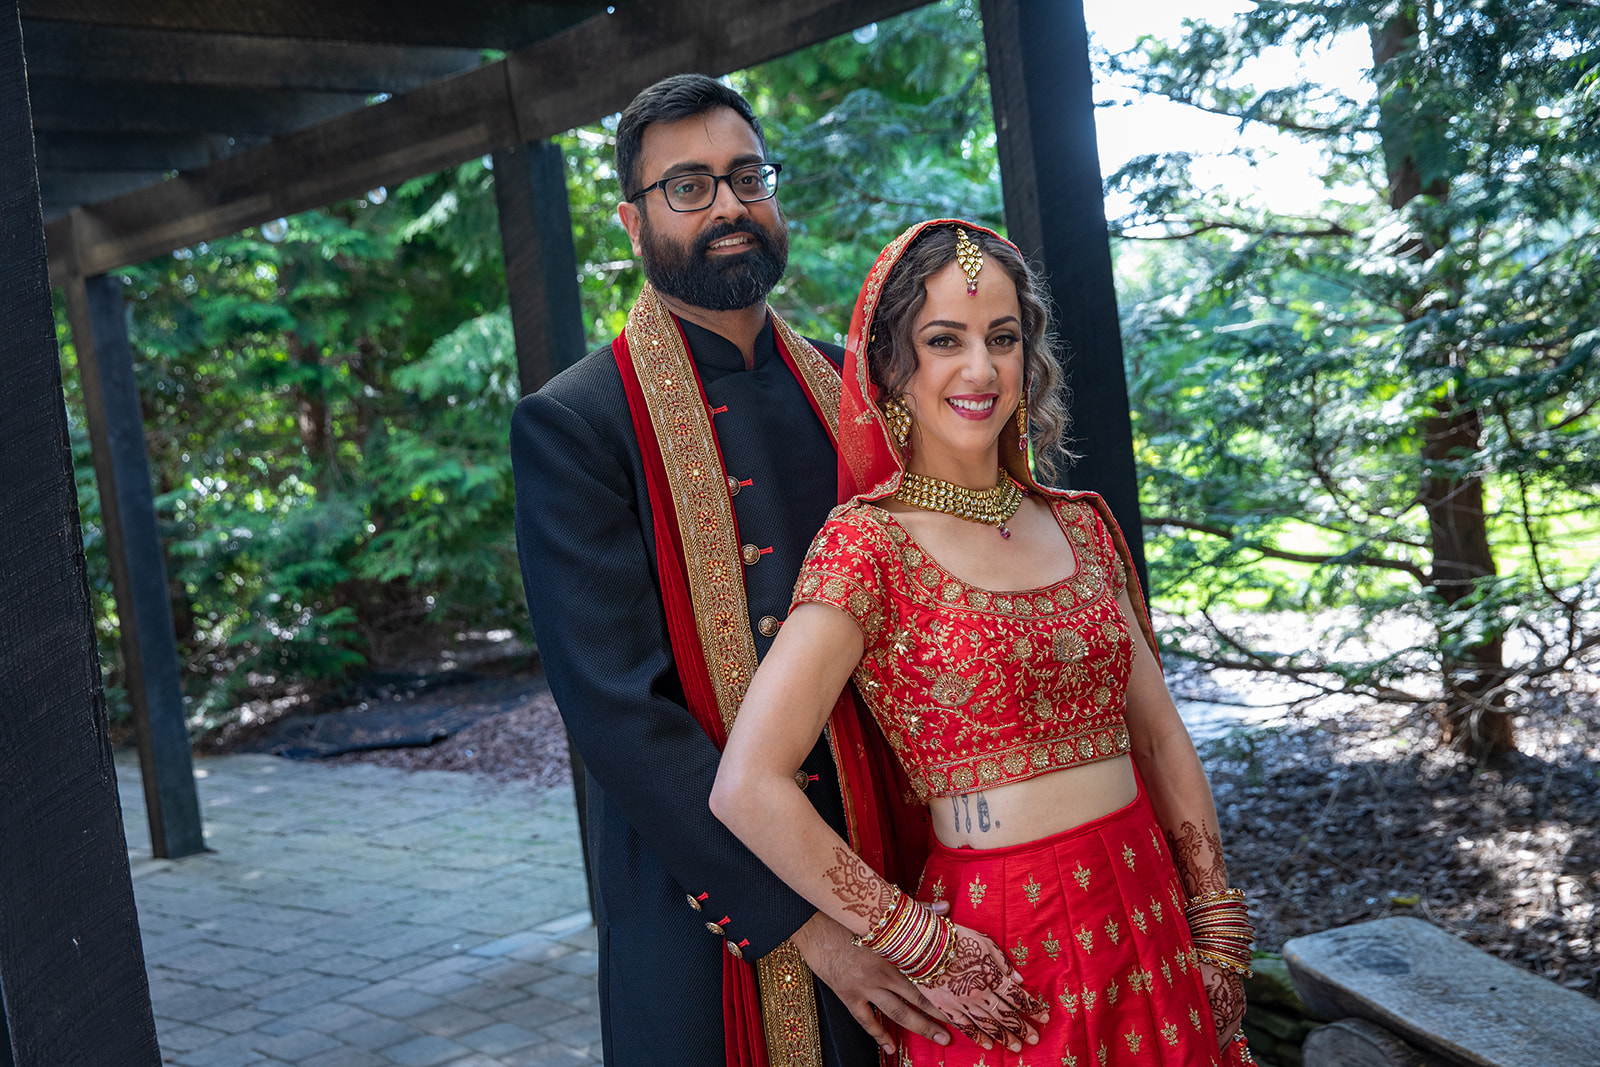 lakehouse inn knot just any day traditional wedding hindu multicultural red dress mandap Pennsylvania celebration reception